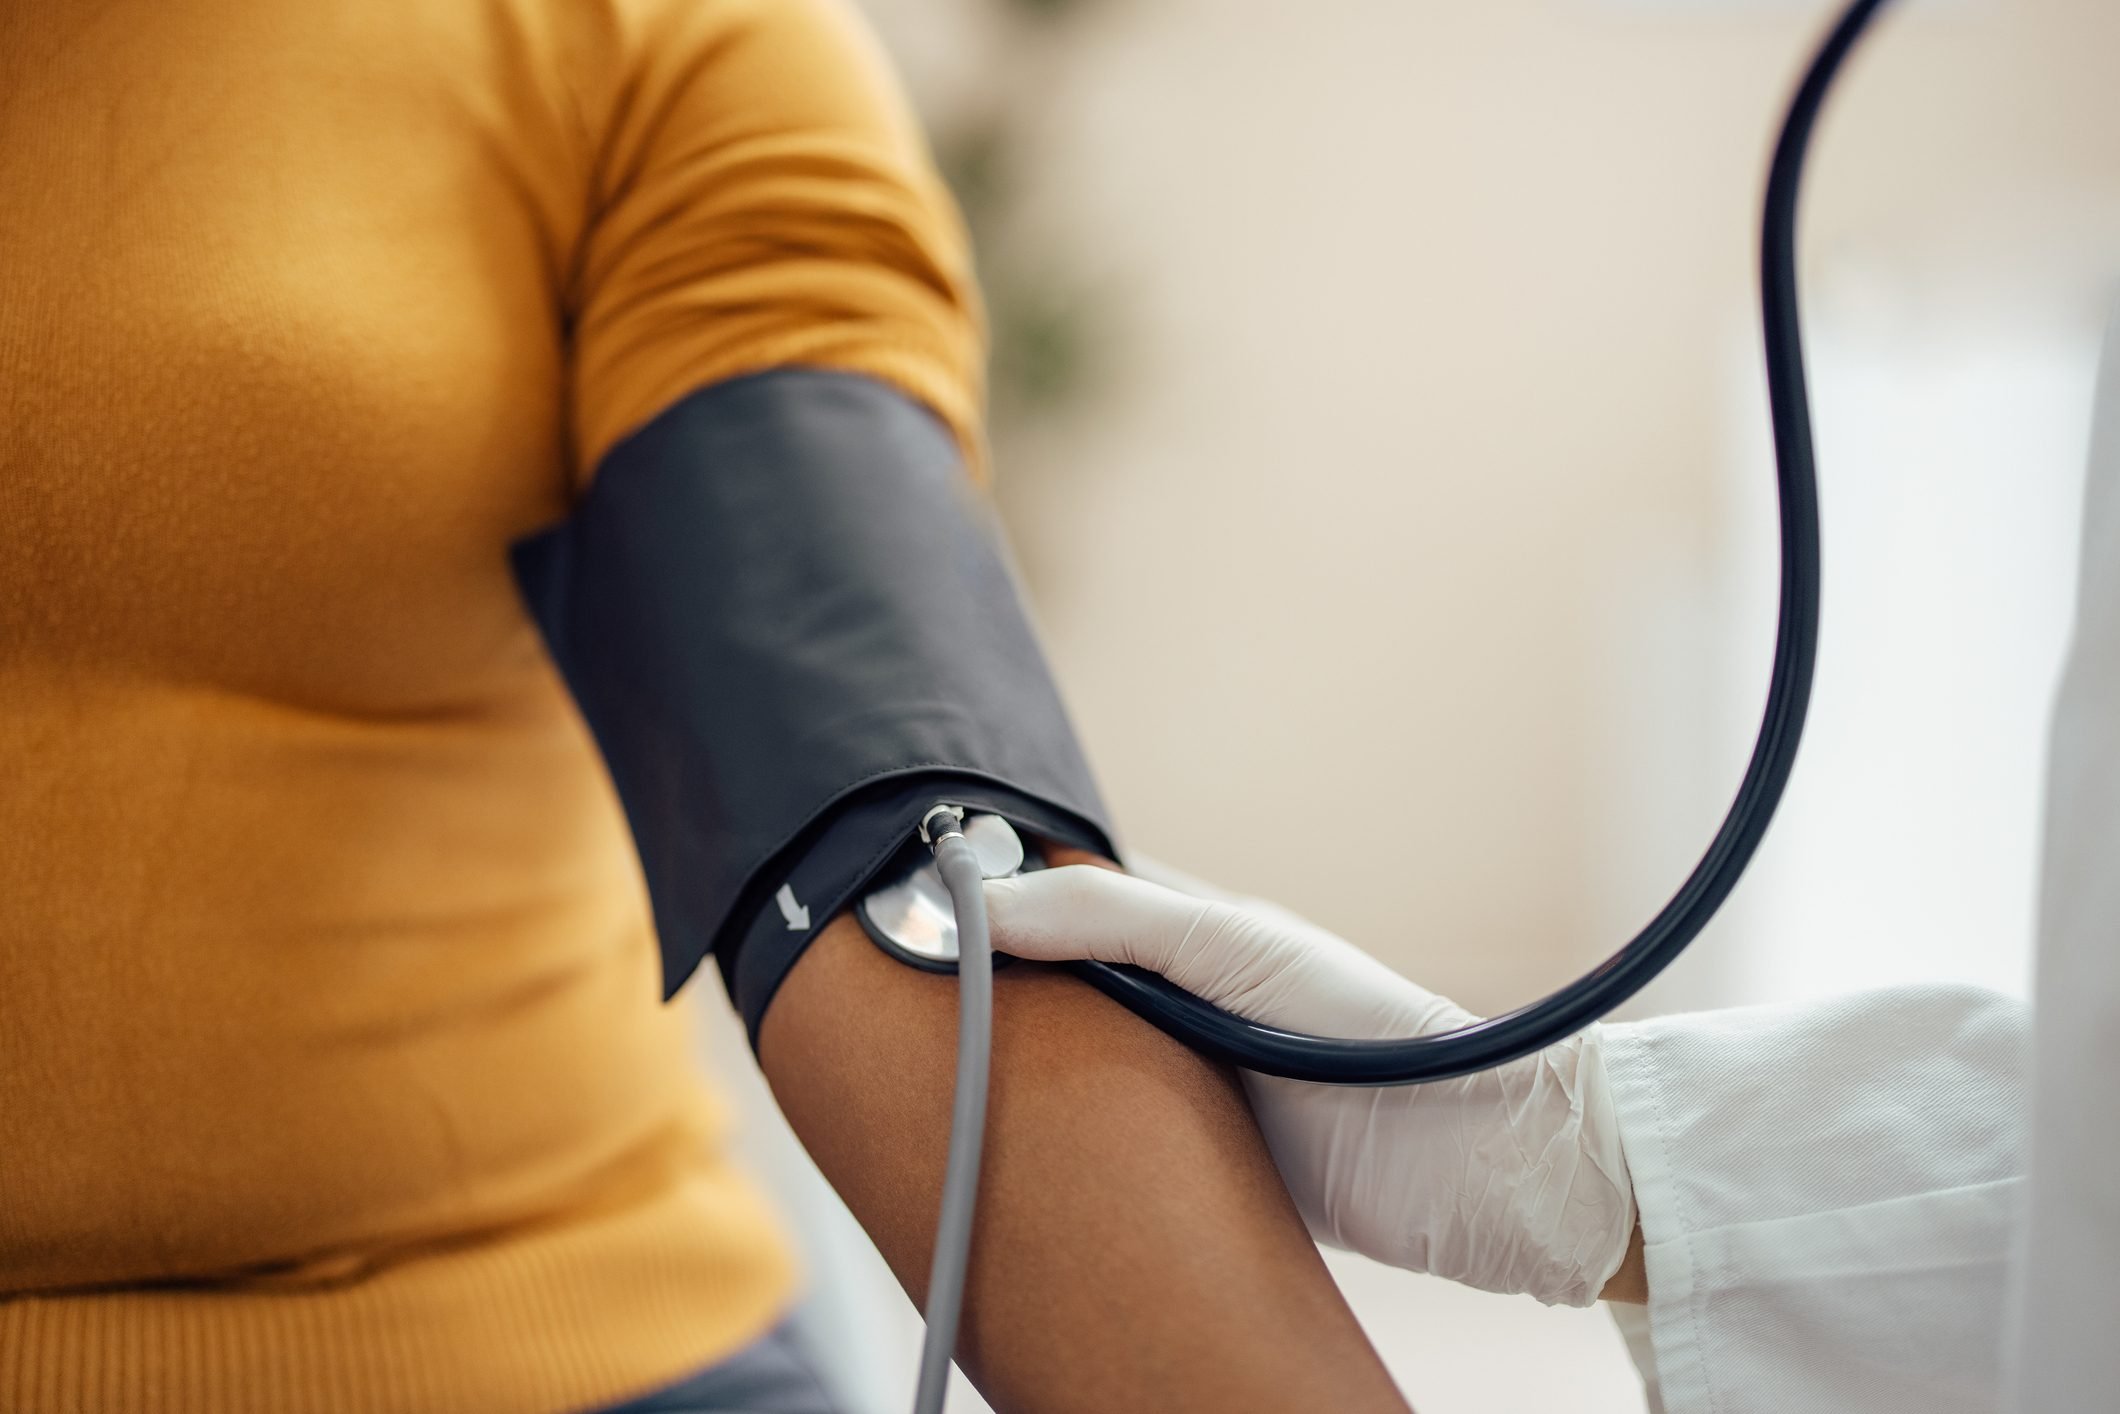 New Study: Blood Pressure, Combined with This, Seriously Influences Dementia Risk